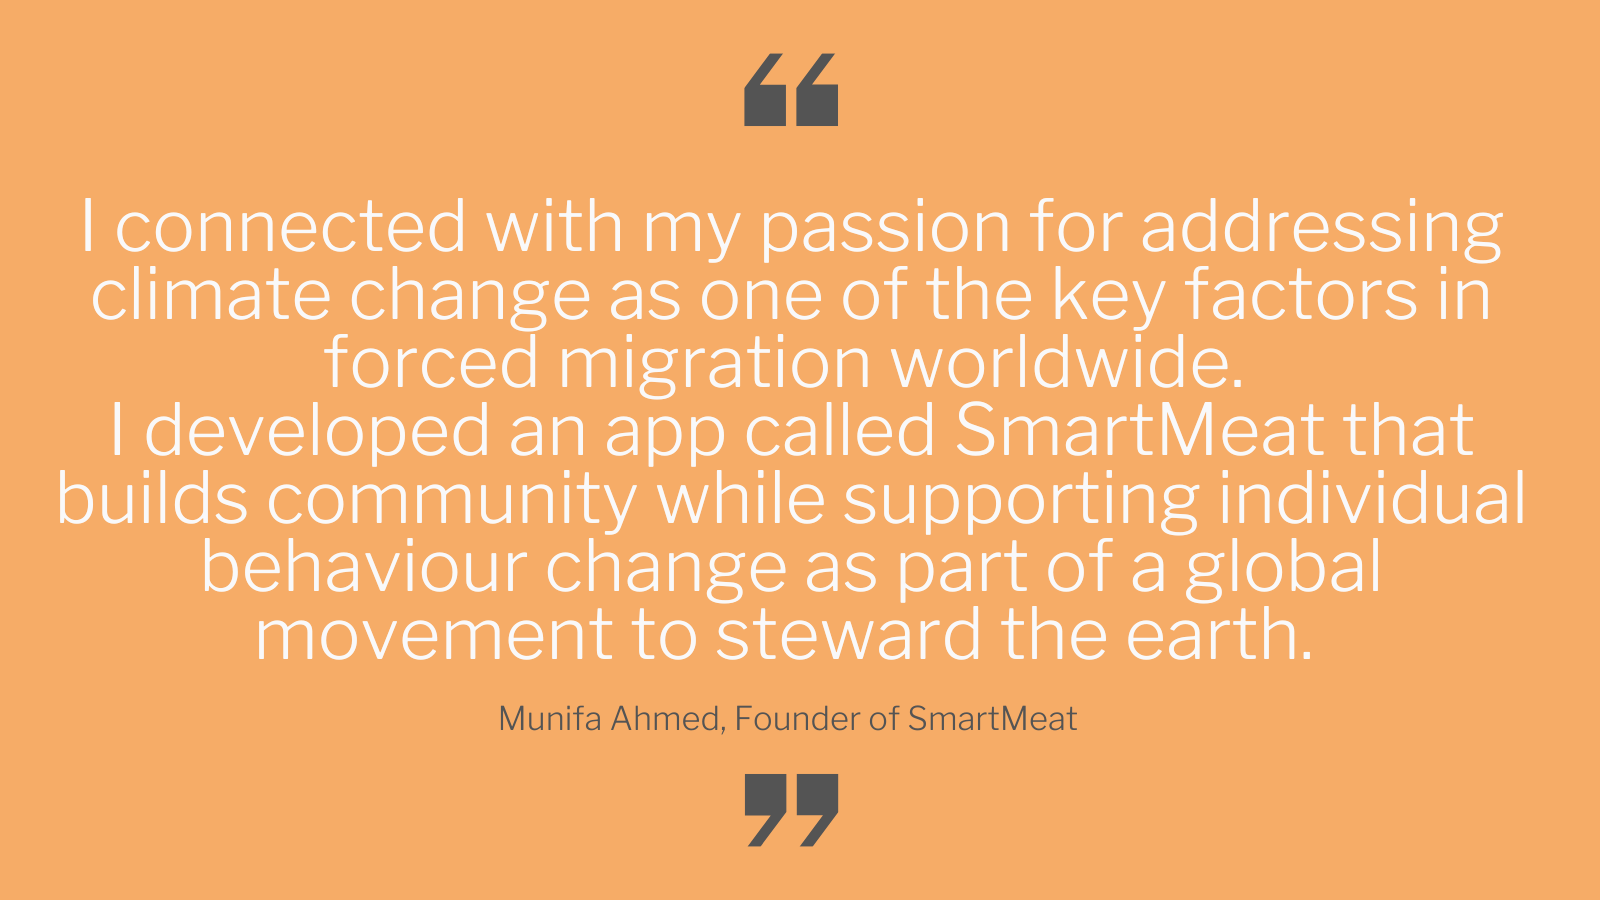 White text on a yellow background that says "I connected with my passion for addressing climate change as one of the key factors in forced migration worldwide. I developed an app called SmartMeat that builds community while supporting individual behaviour change as part of a global movement to steward the earth. Munifa Ahmed, Founder of SmartMeat"